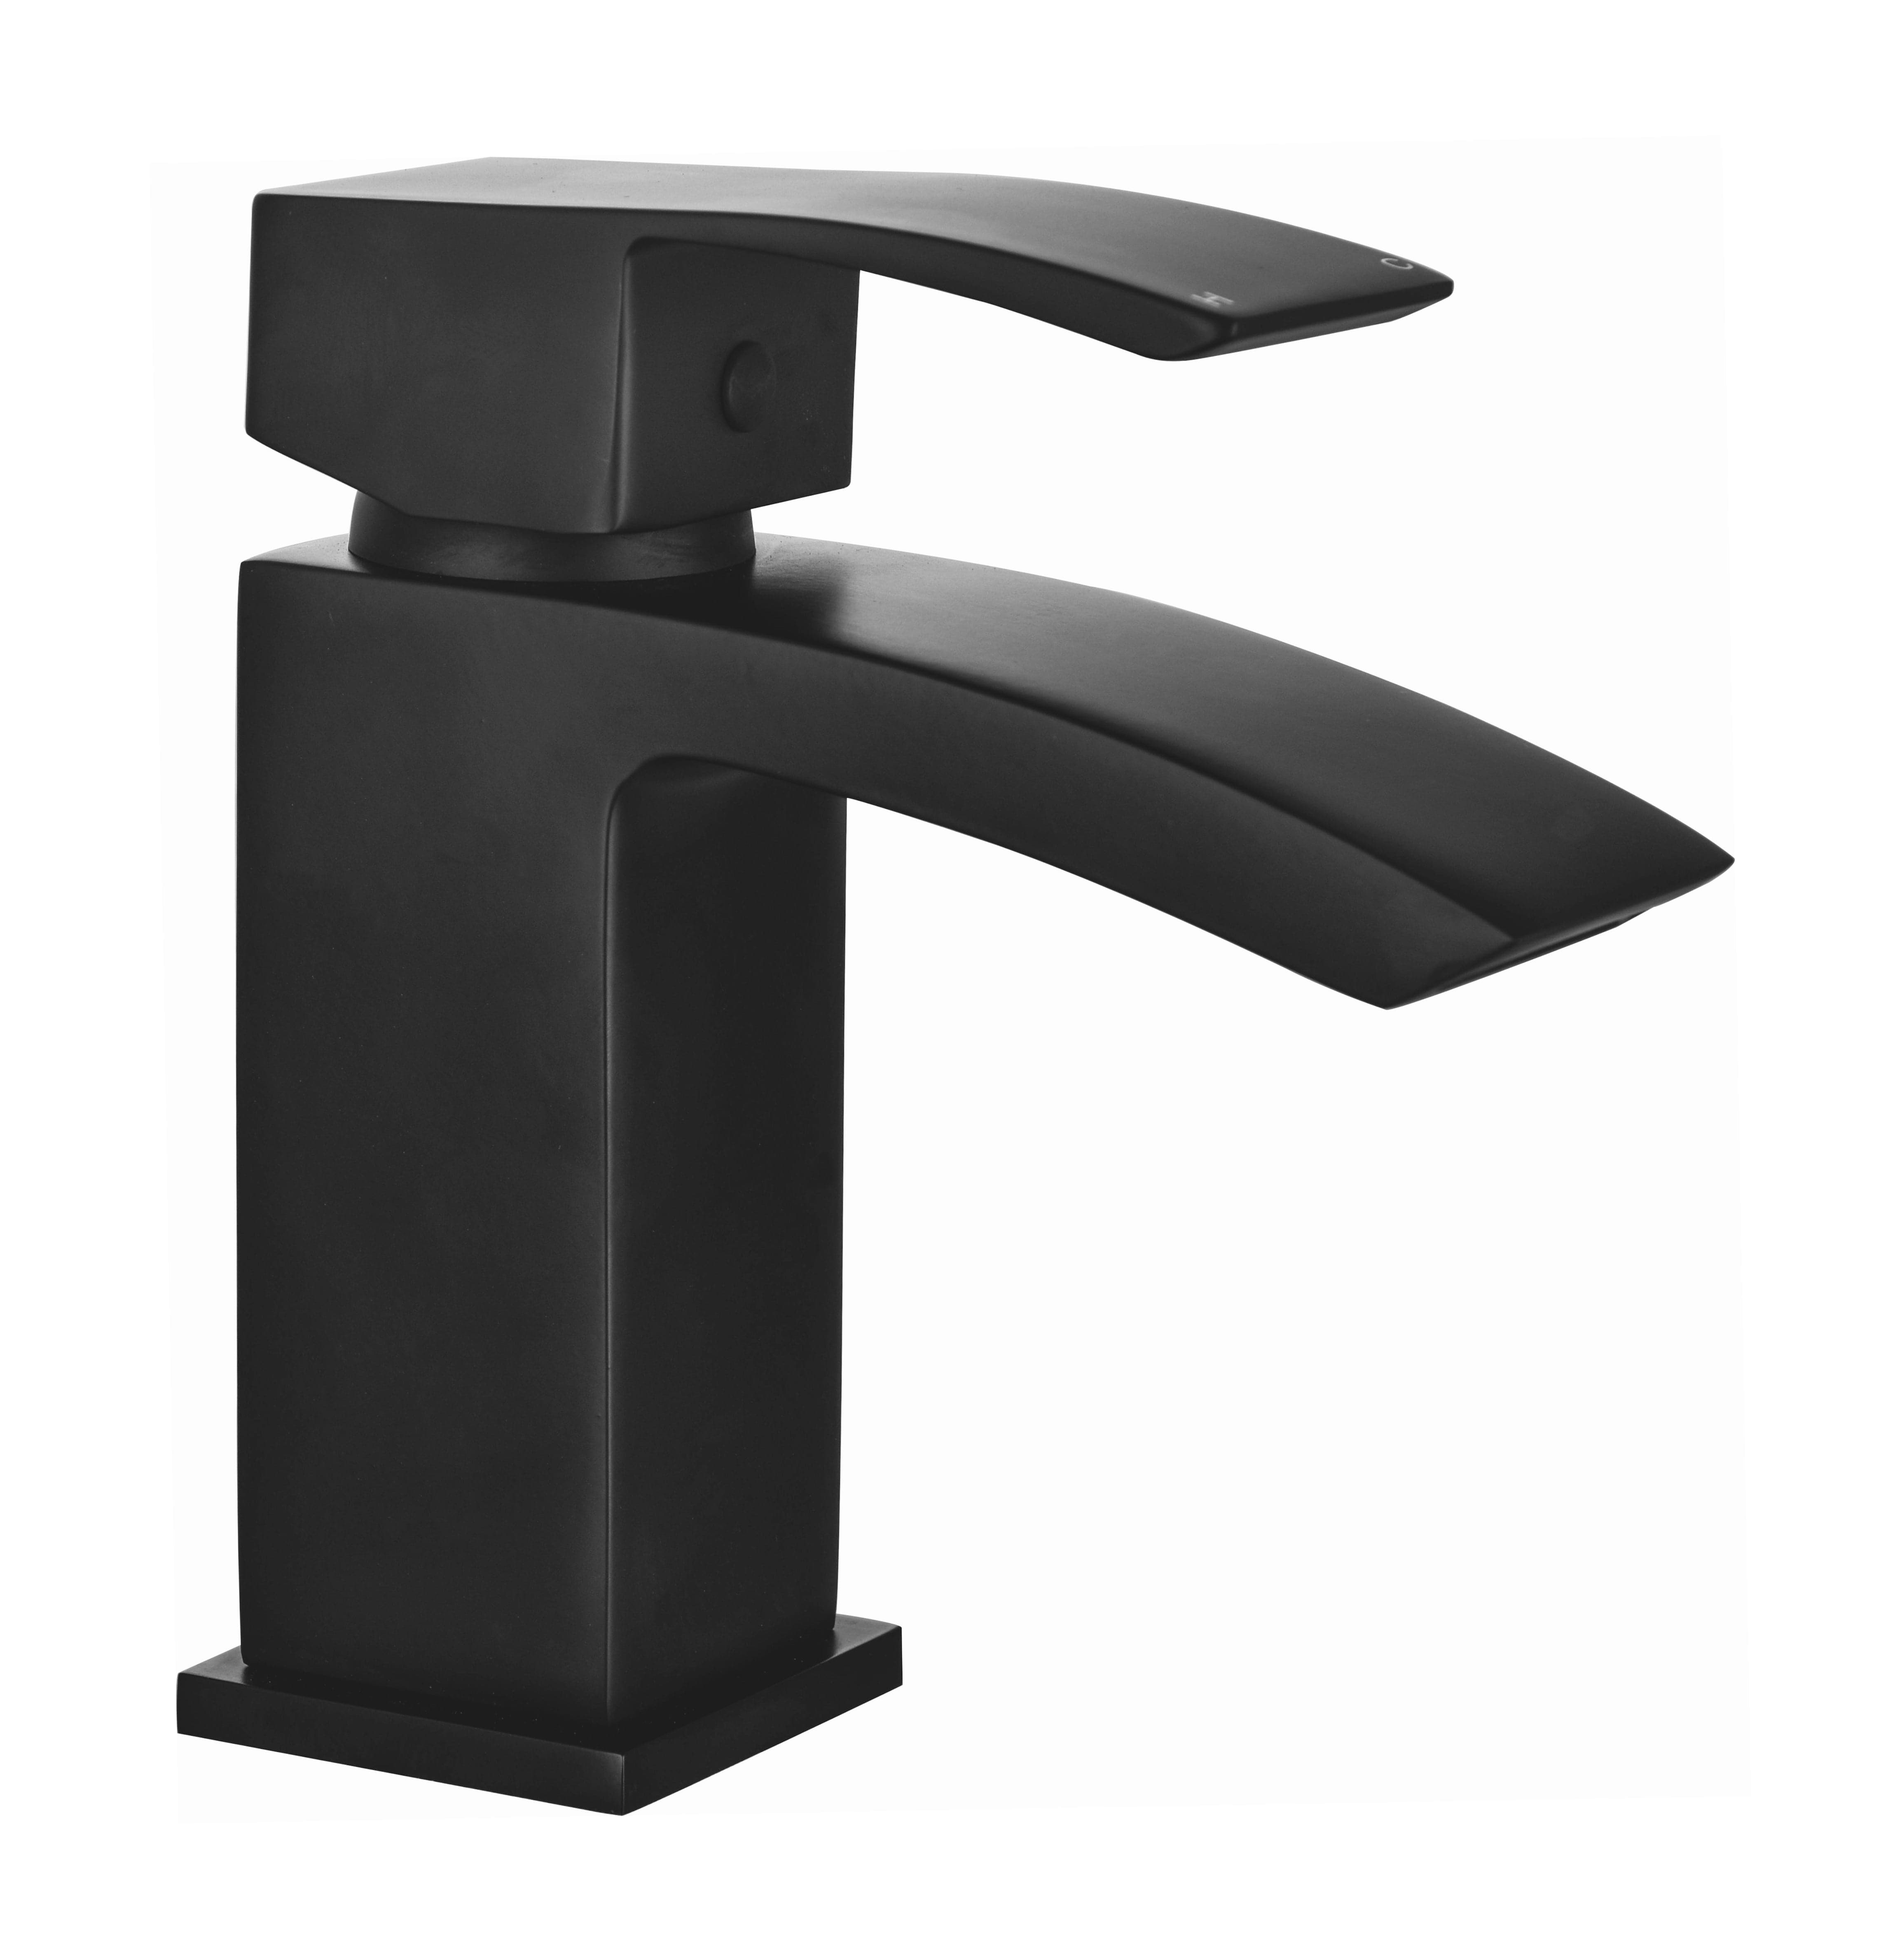 Trace Mono Basin Mixer Tap with Waste - Matt Black, sleek design for modern bathrooms. Buy now for quality and style at Bathroom4Less.